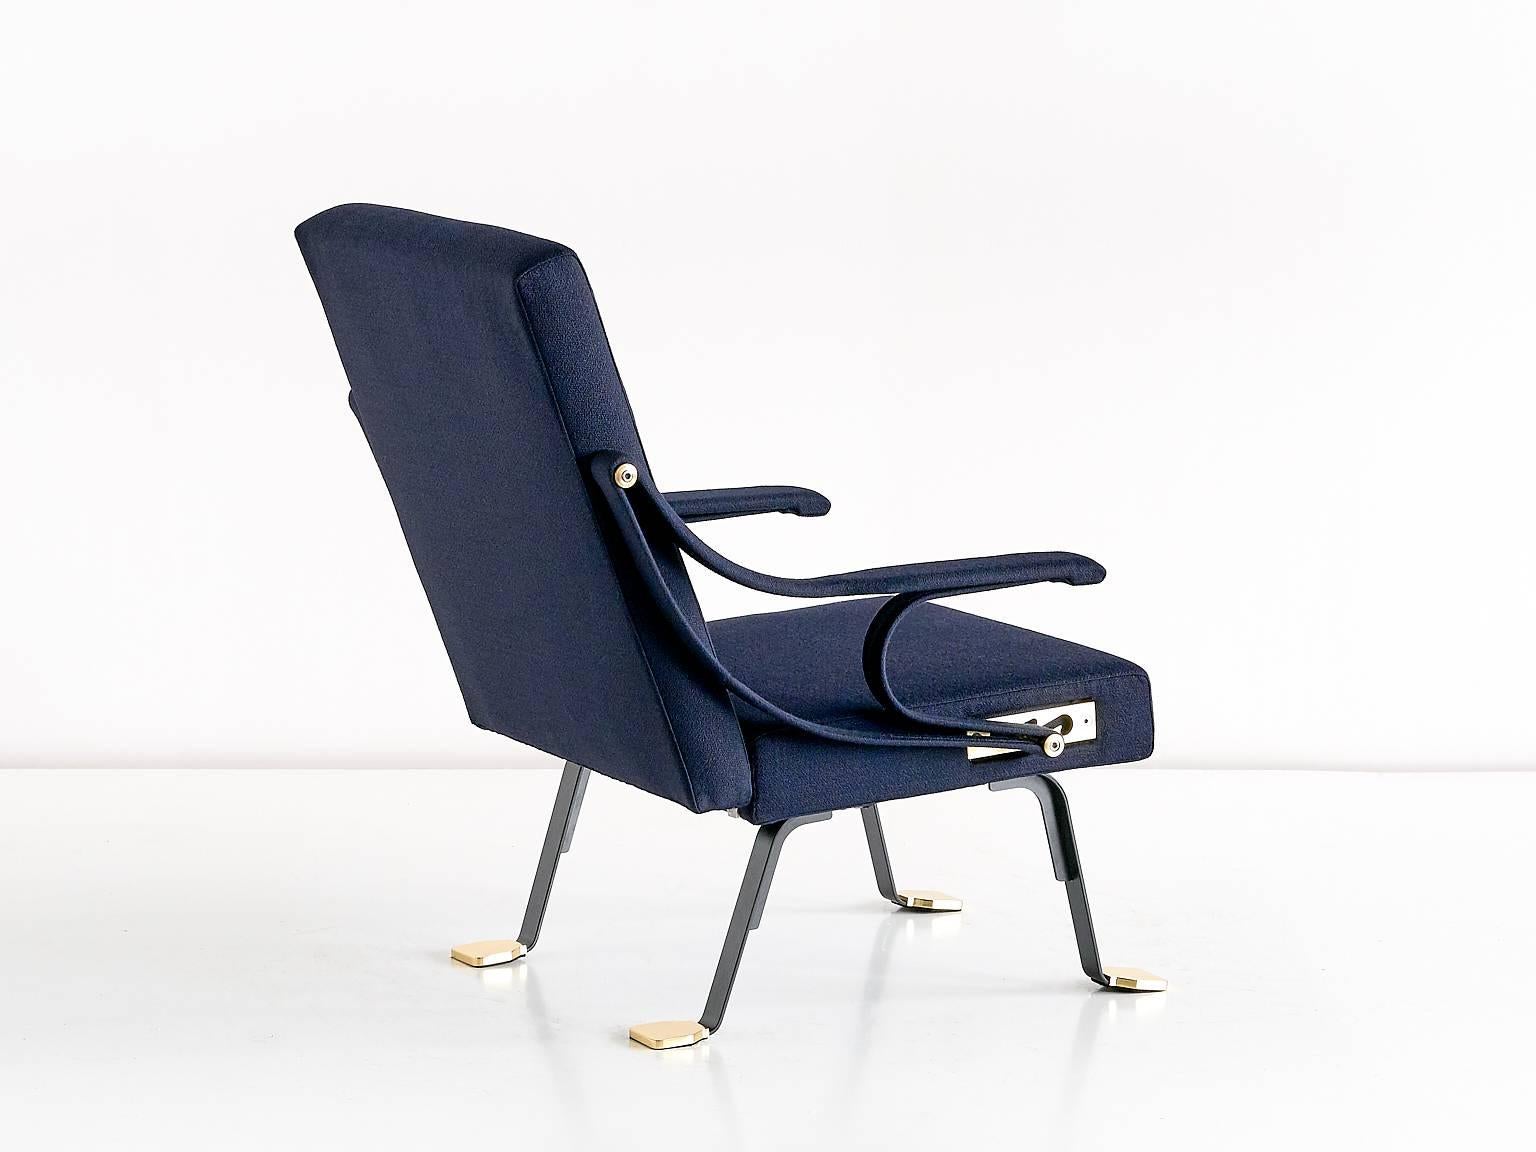 Polished Pair of Ignazio Gardella Digamma Armchairs in Blue Raf Simons for Kvadrat Fabric